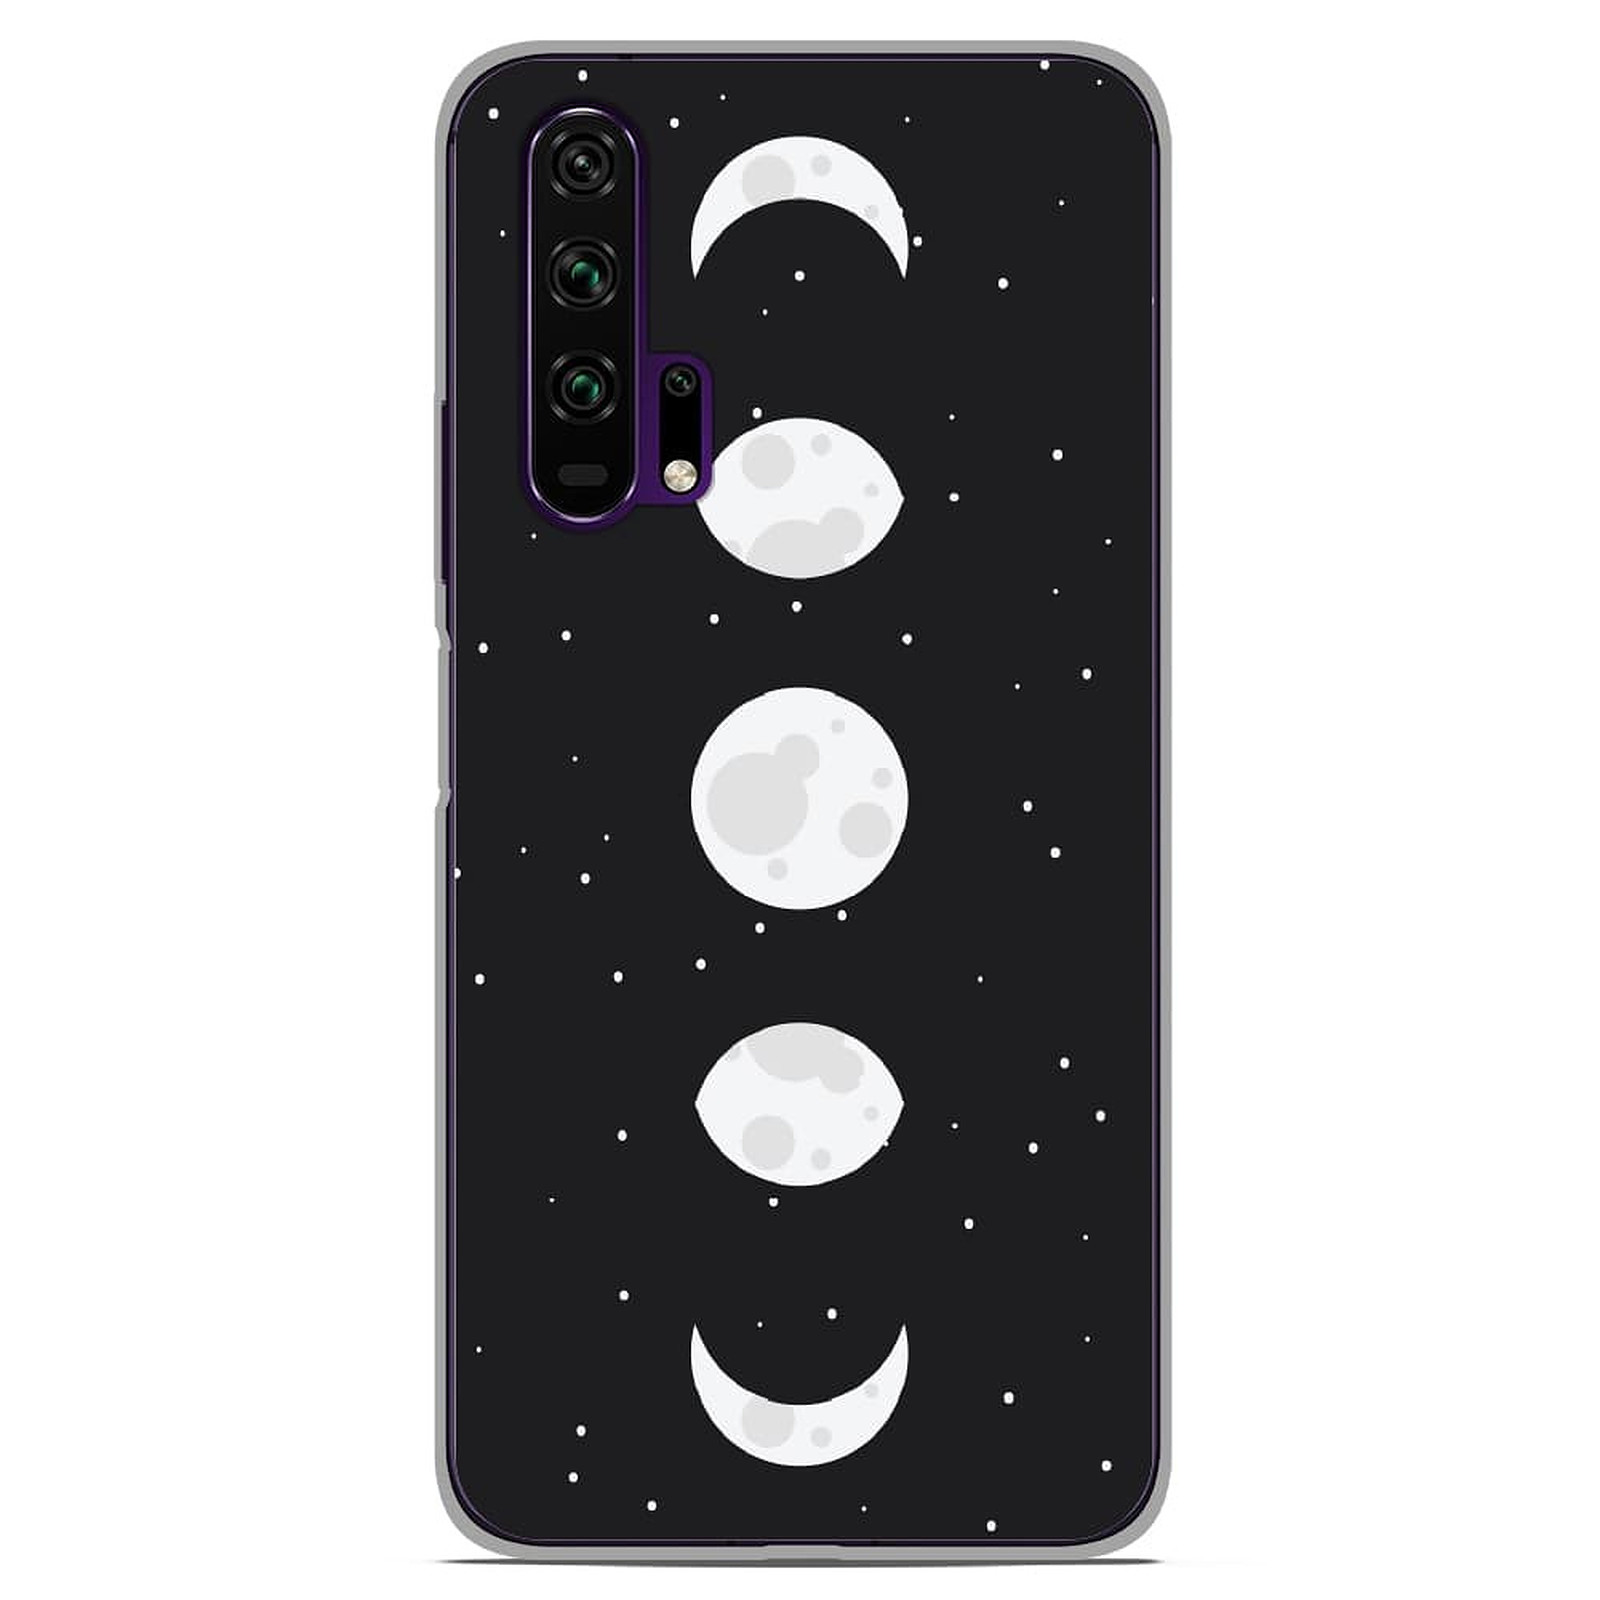 1001 Coques Coque silicone gel Huawei Honor 20 Pro motif Phase de Lune - Coque telephone 1001Coques